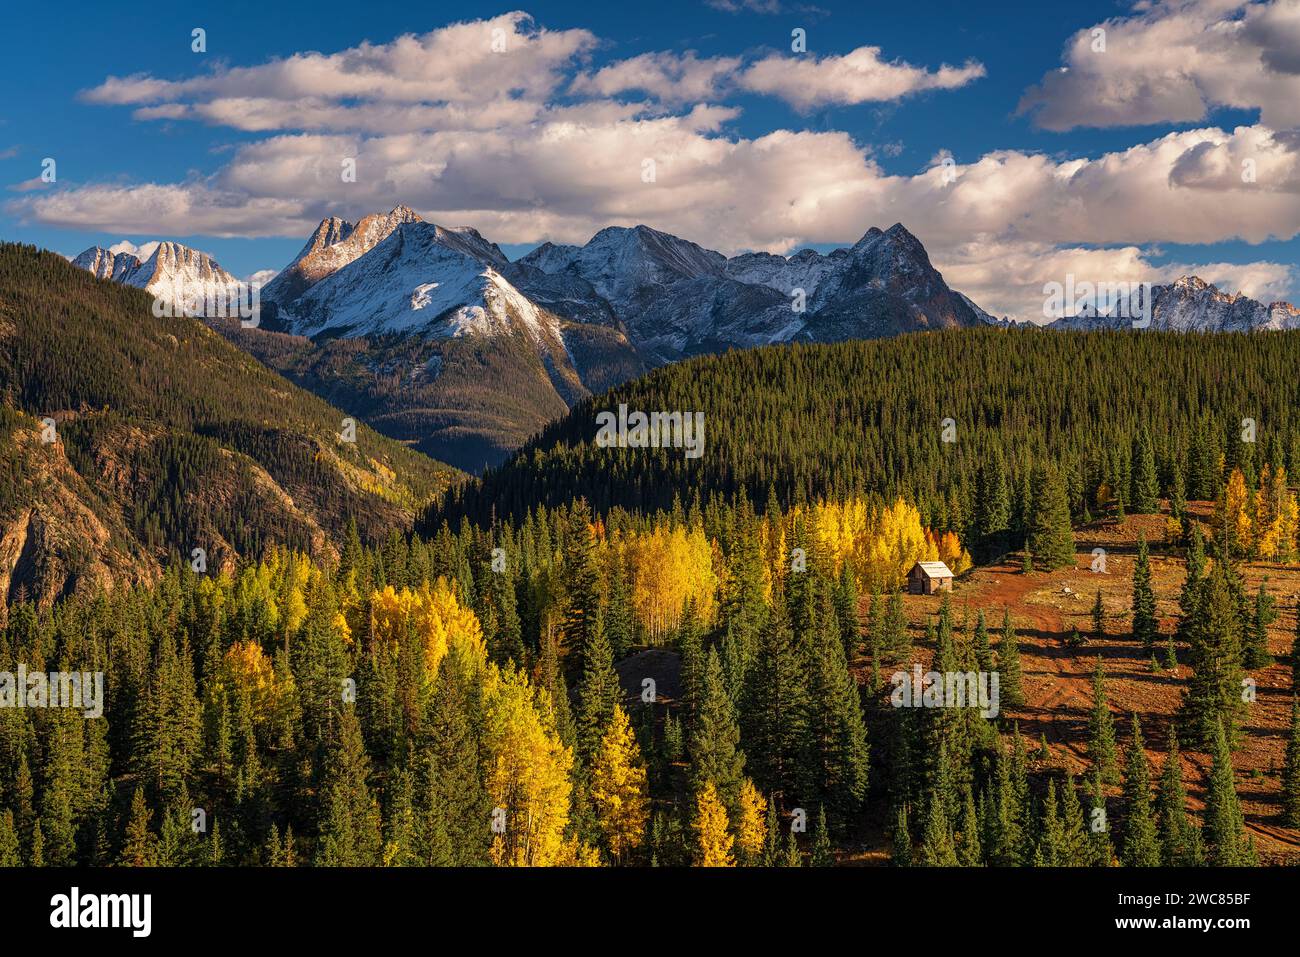 Mining shack nestled in aspens and pine forest beneath snow-covered mountains along the Million Dollar Highway in Colorado Stock Photo